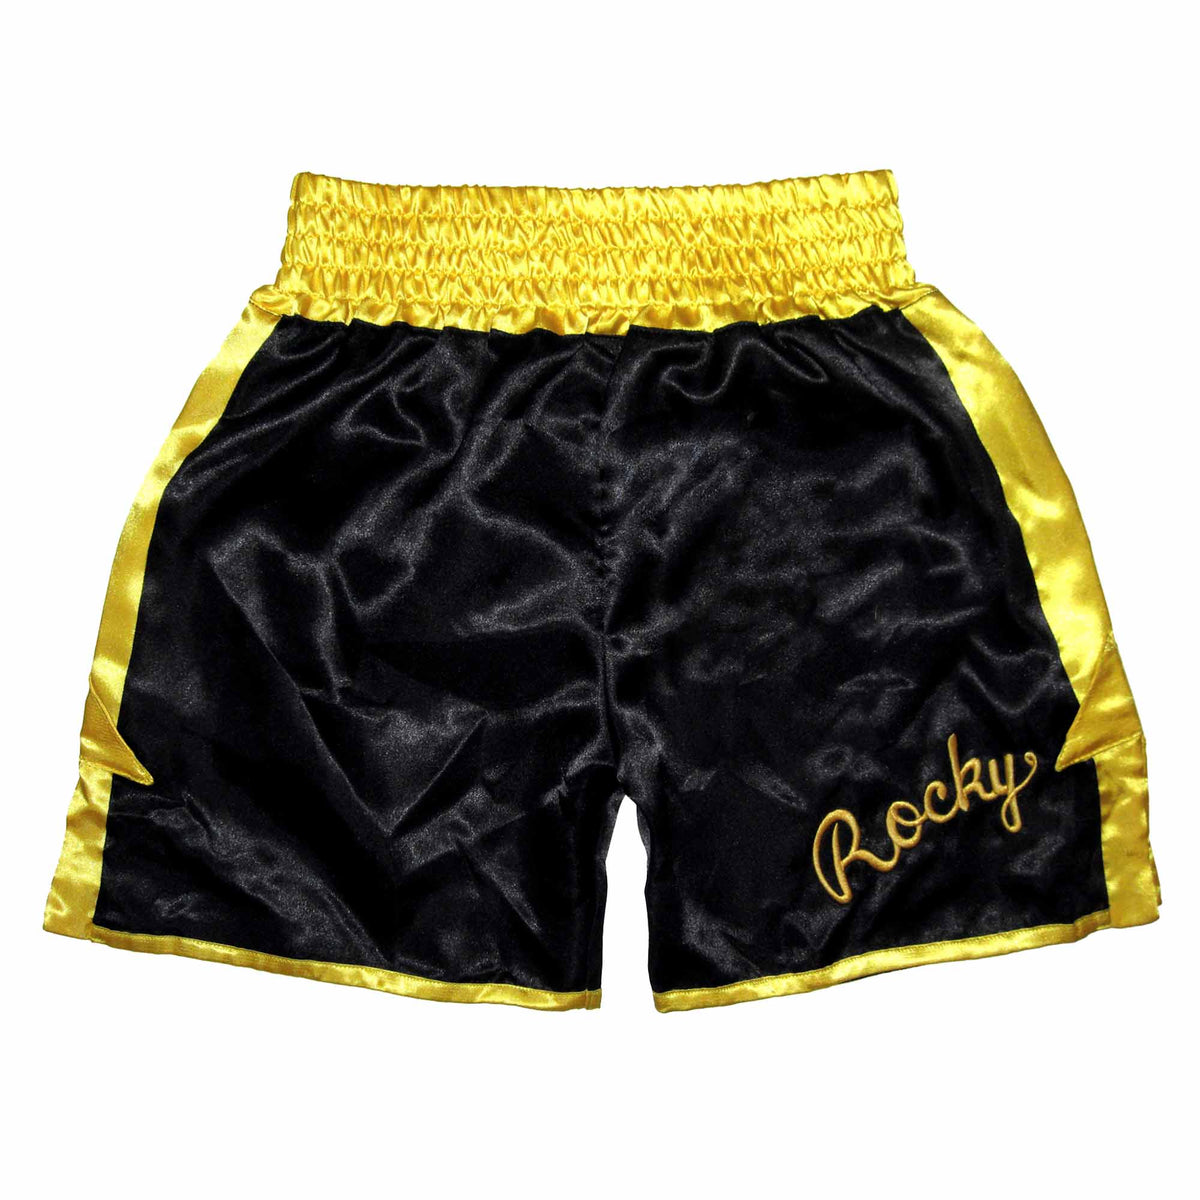 Rocky II Boxing Trunks – Sly Stallone Shop